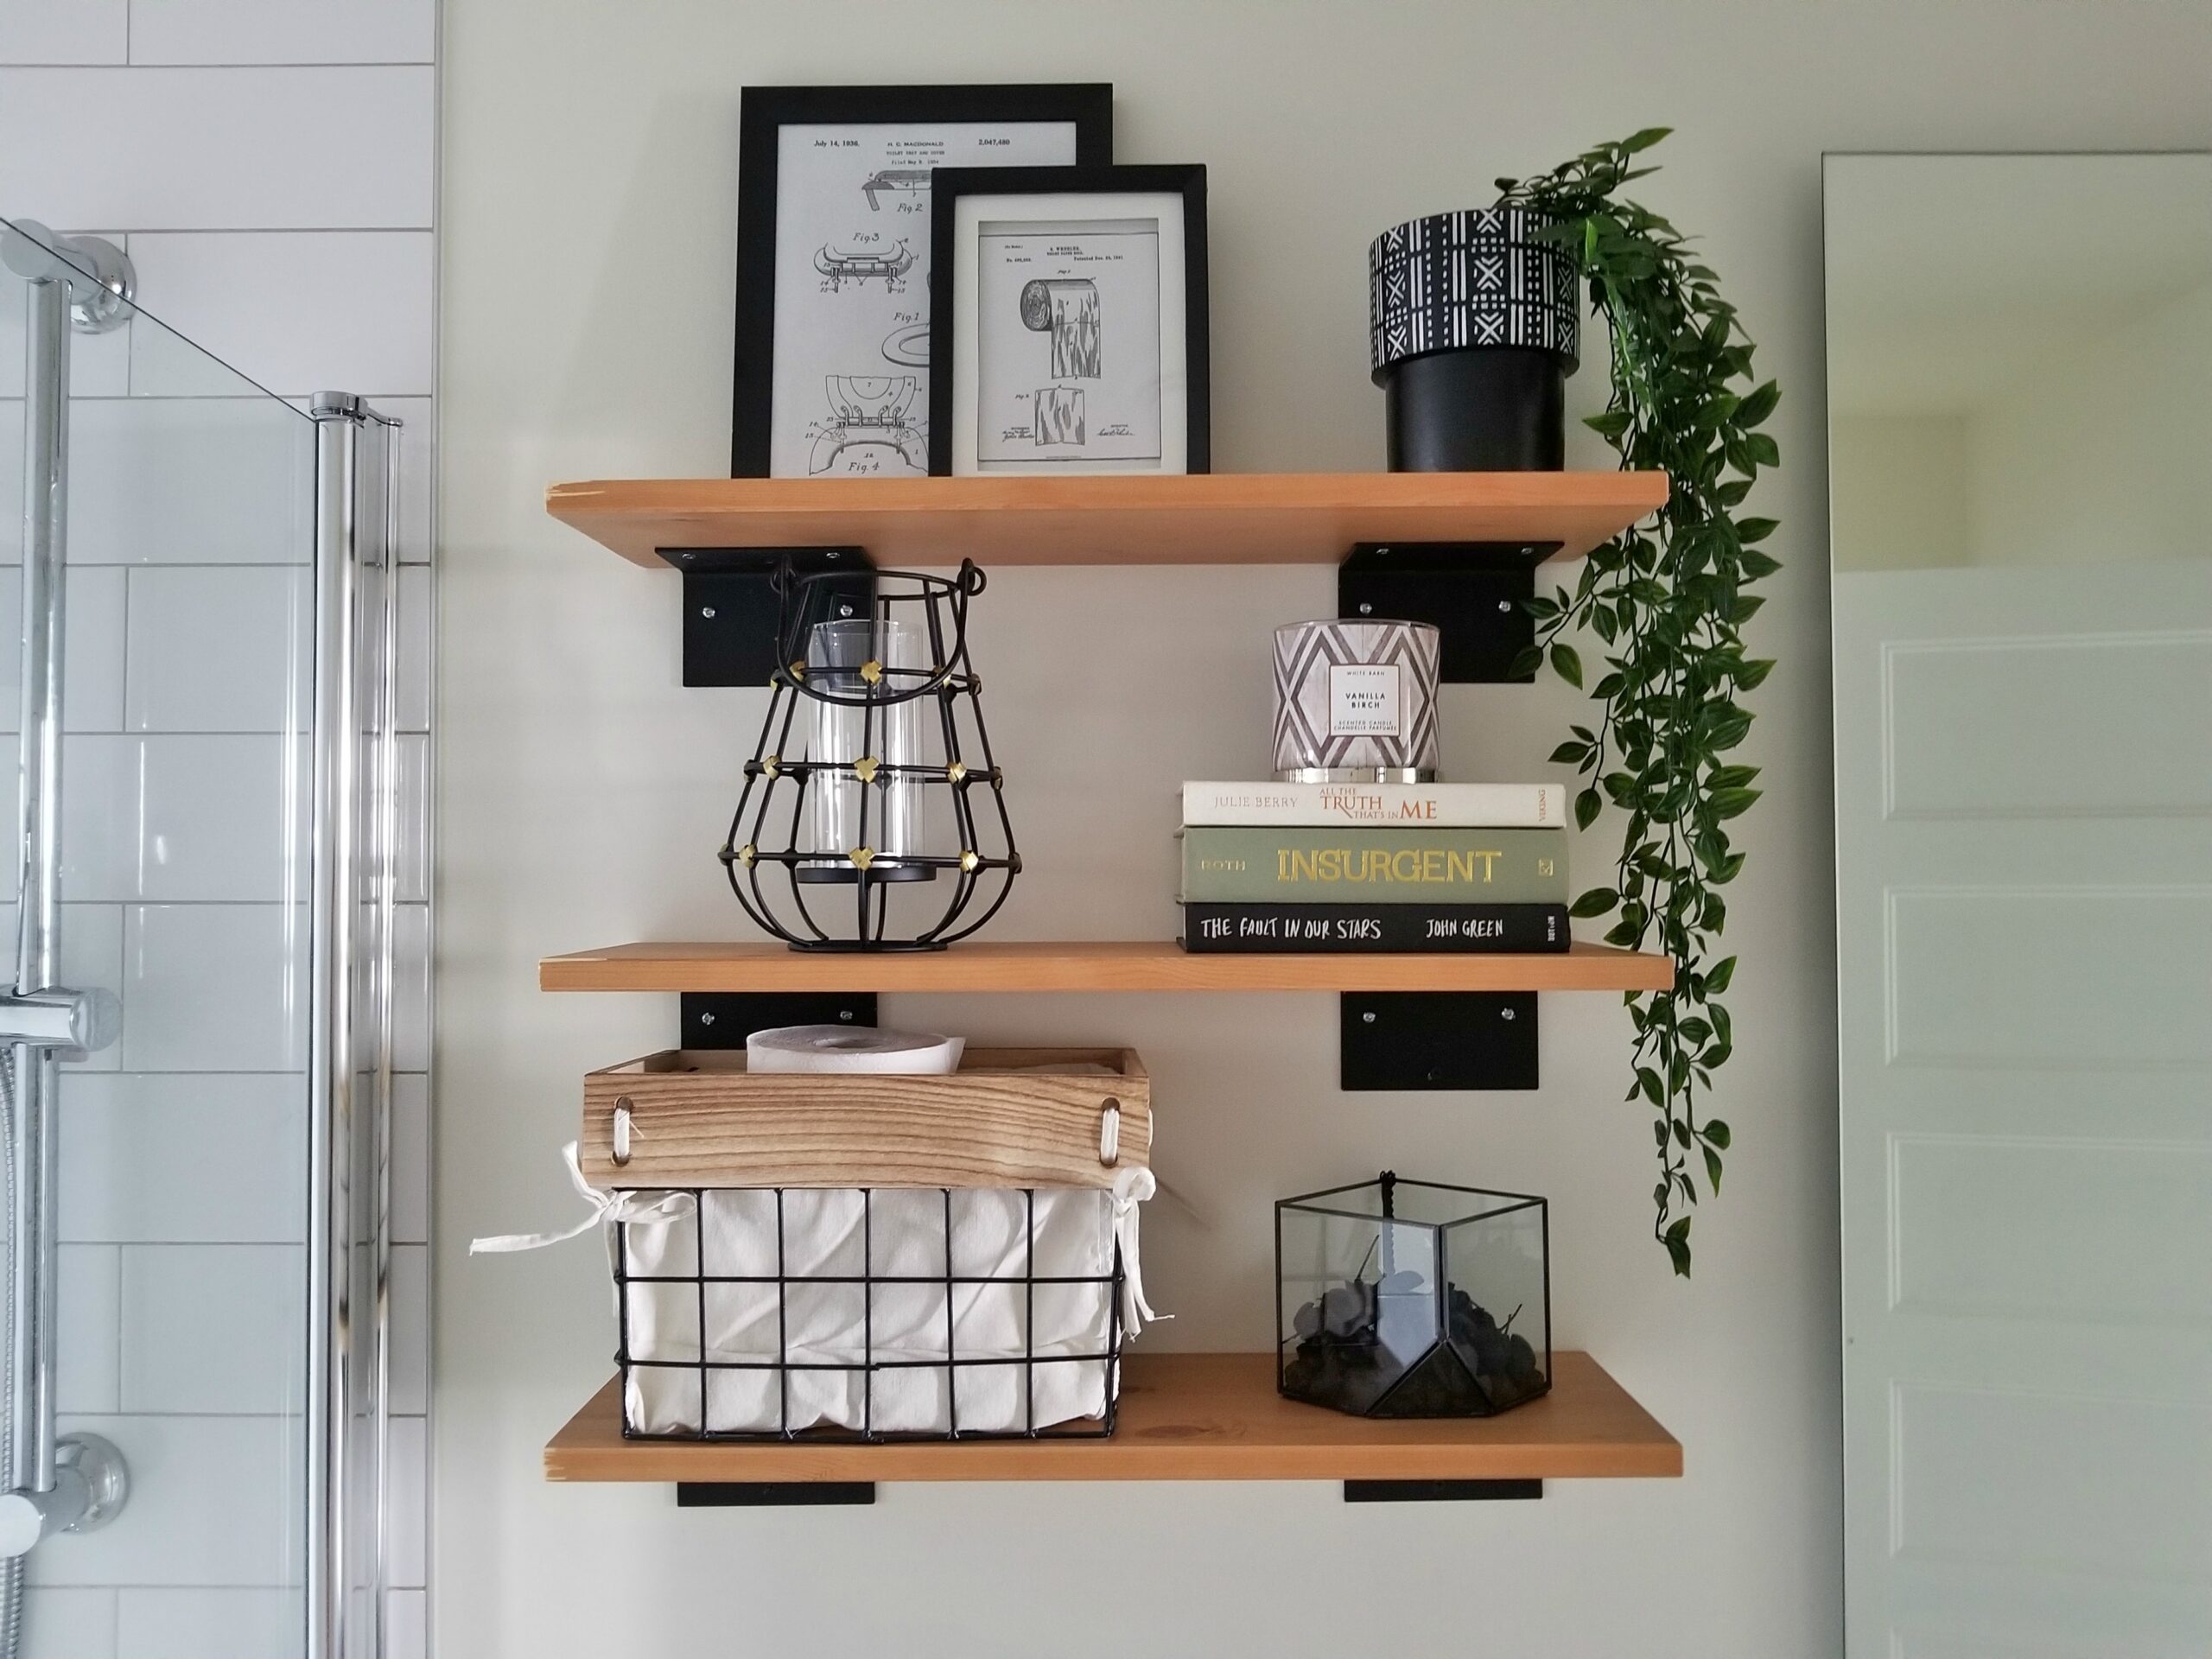 Ikea Wall Shelves How To Hang, How To Hang Shelves With Wall Anchors